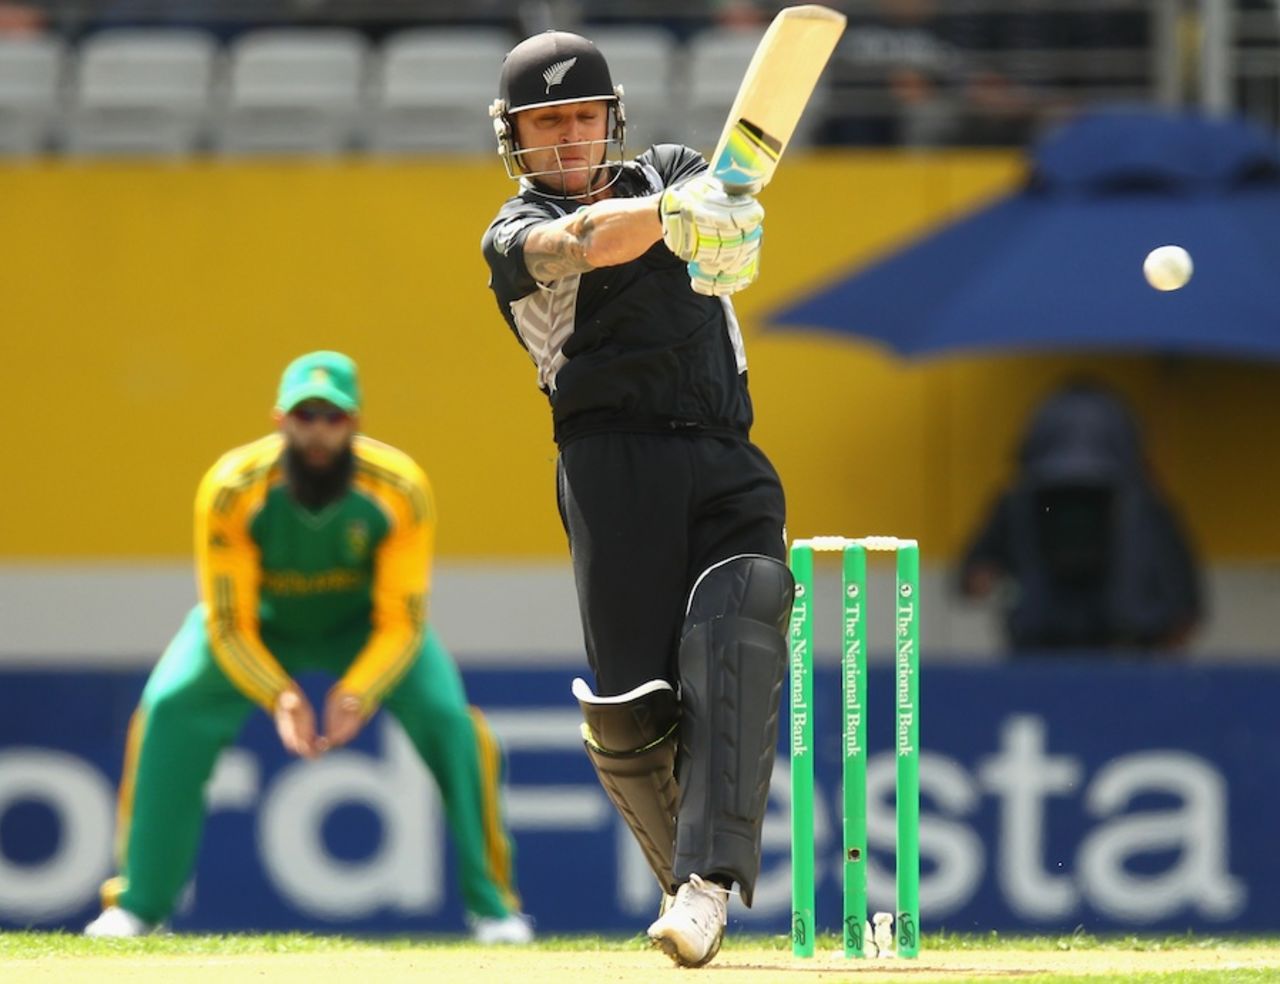 Brendon McCullum pulls during his innings of 47, New Zealand v South Africa, 3rd ODI, Auckland, March 3, 2012